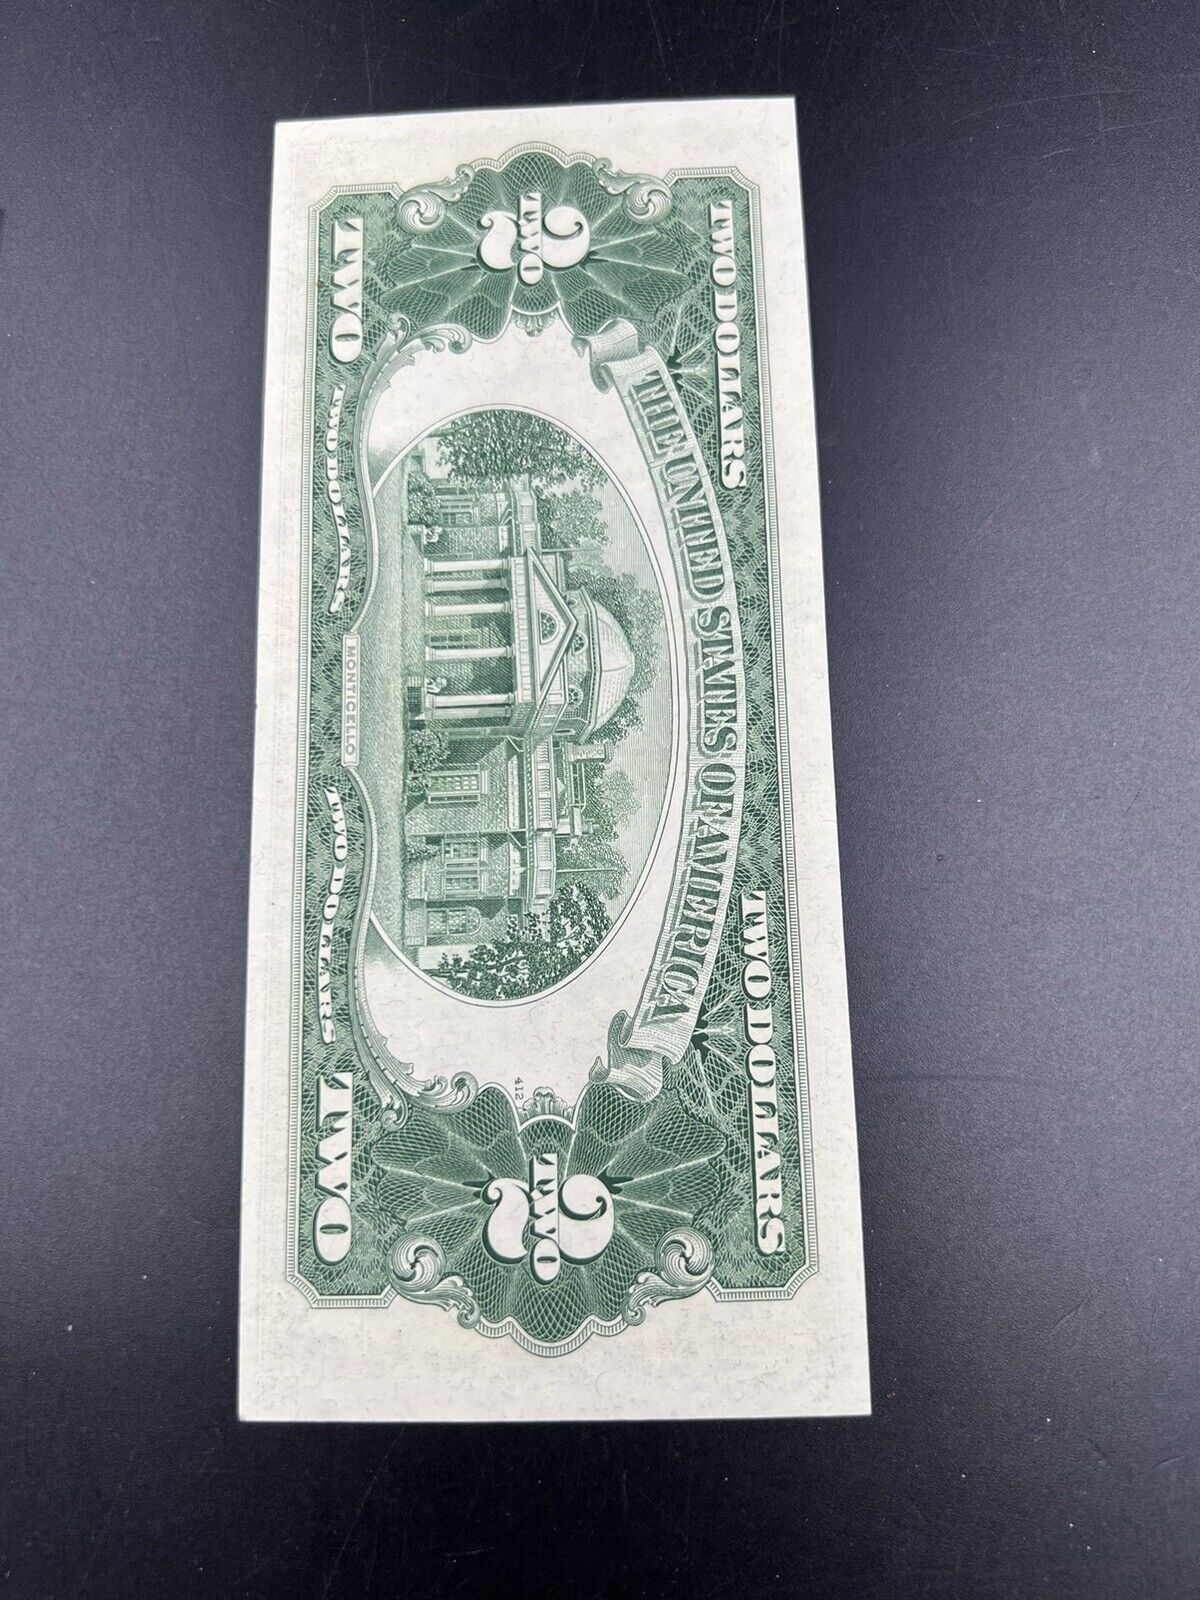 1953 C $2 United States Currency Legal Tender Note Red Seal UNC Uncirculated